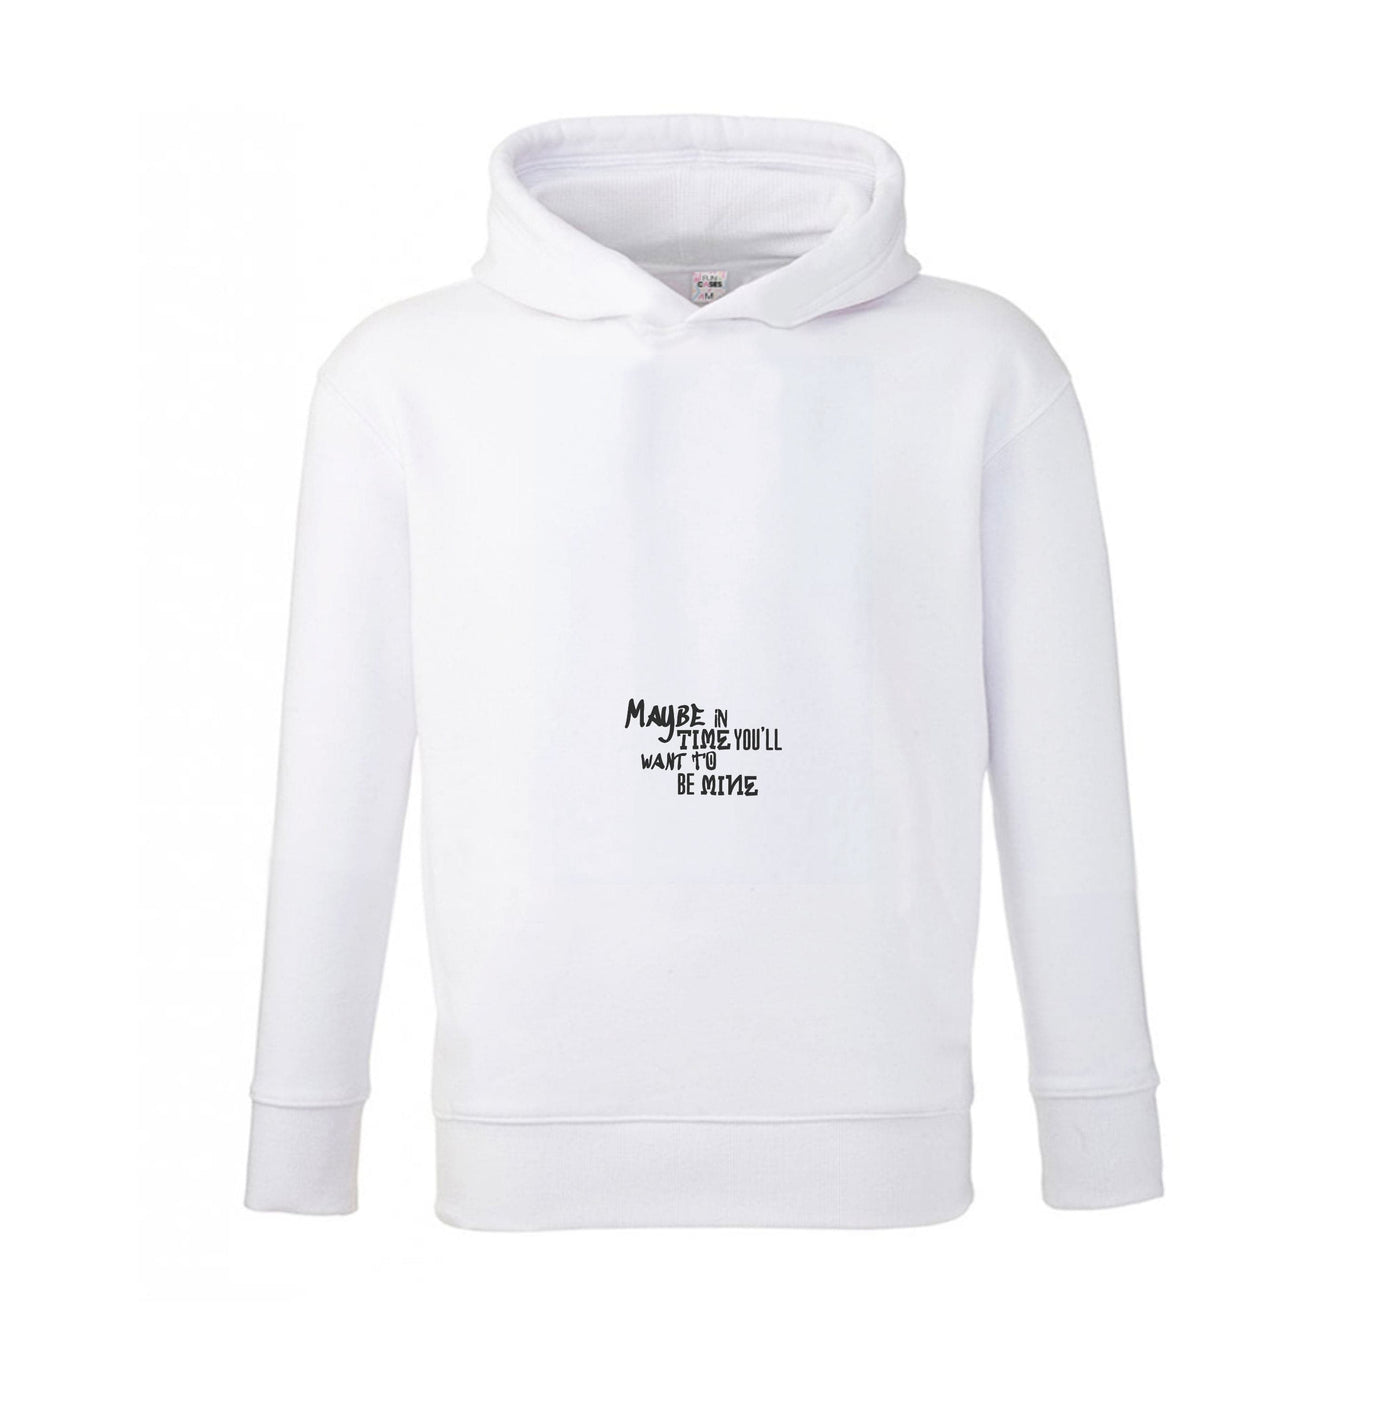 Maybe In Time - Gorillaz Kids Hoodie